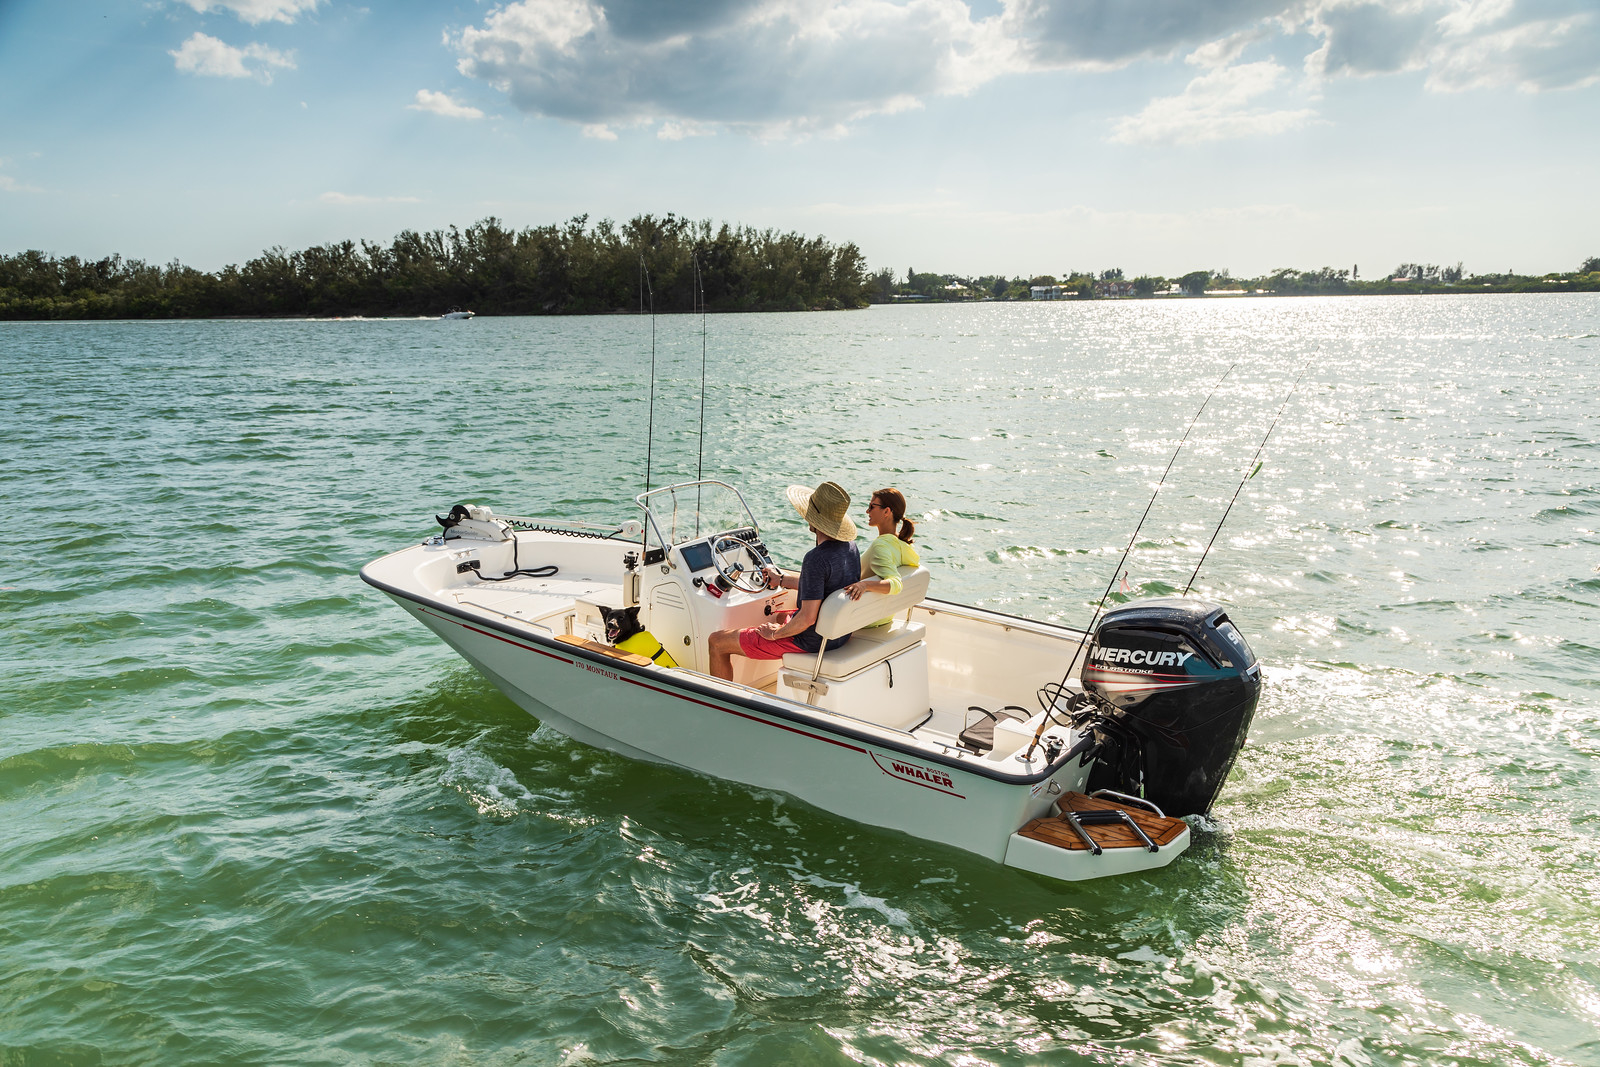 Boston Whaler 170 Montauk Prices, Specs, Reviews and Sales Information